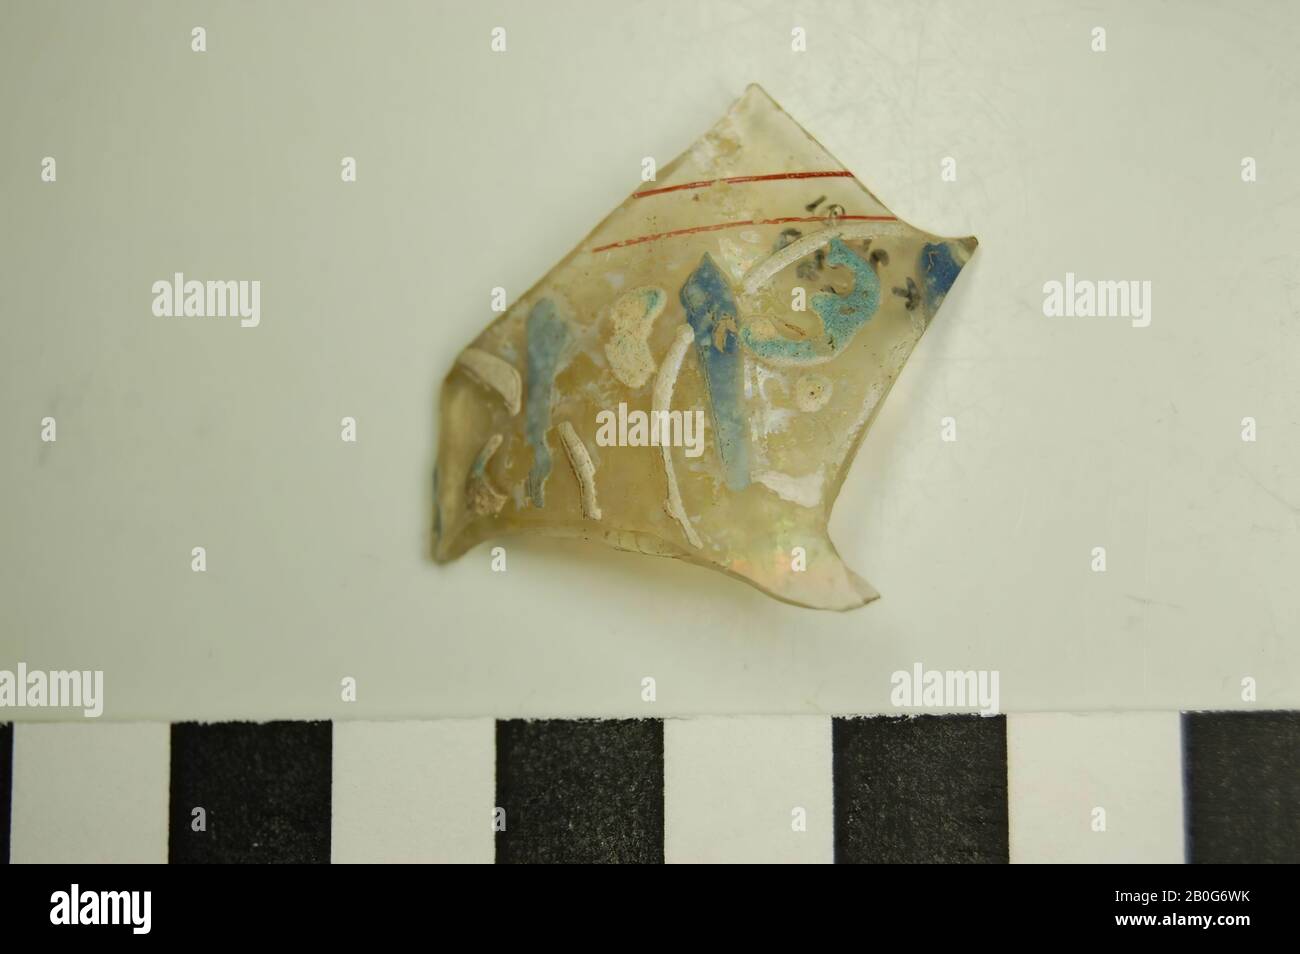 Glass shard with the colors white, blue and gold. On the surface ir., Shard, glass, 3.5 x 4 cm, Roman 50-100, Egypt Stock Photo